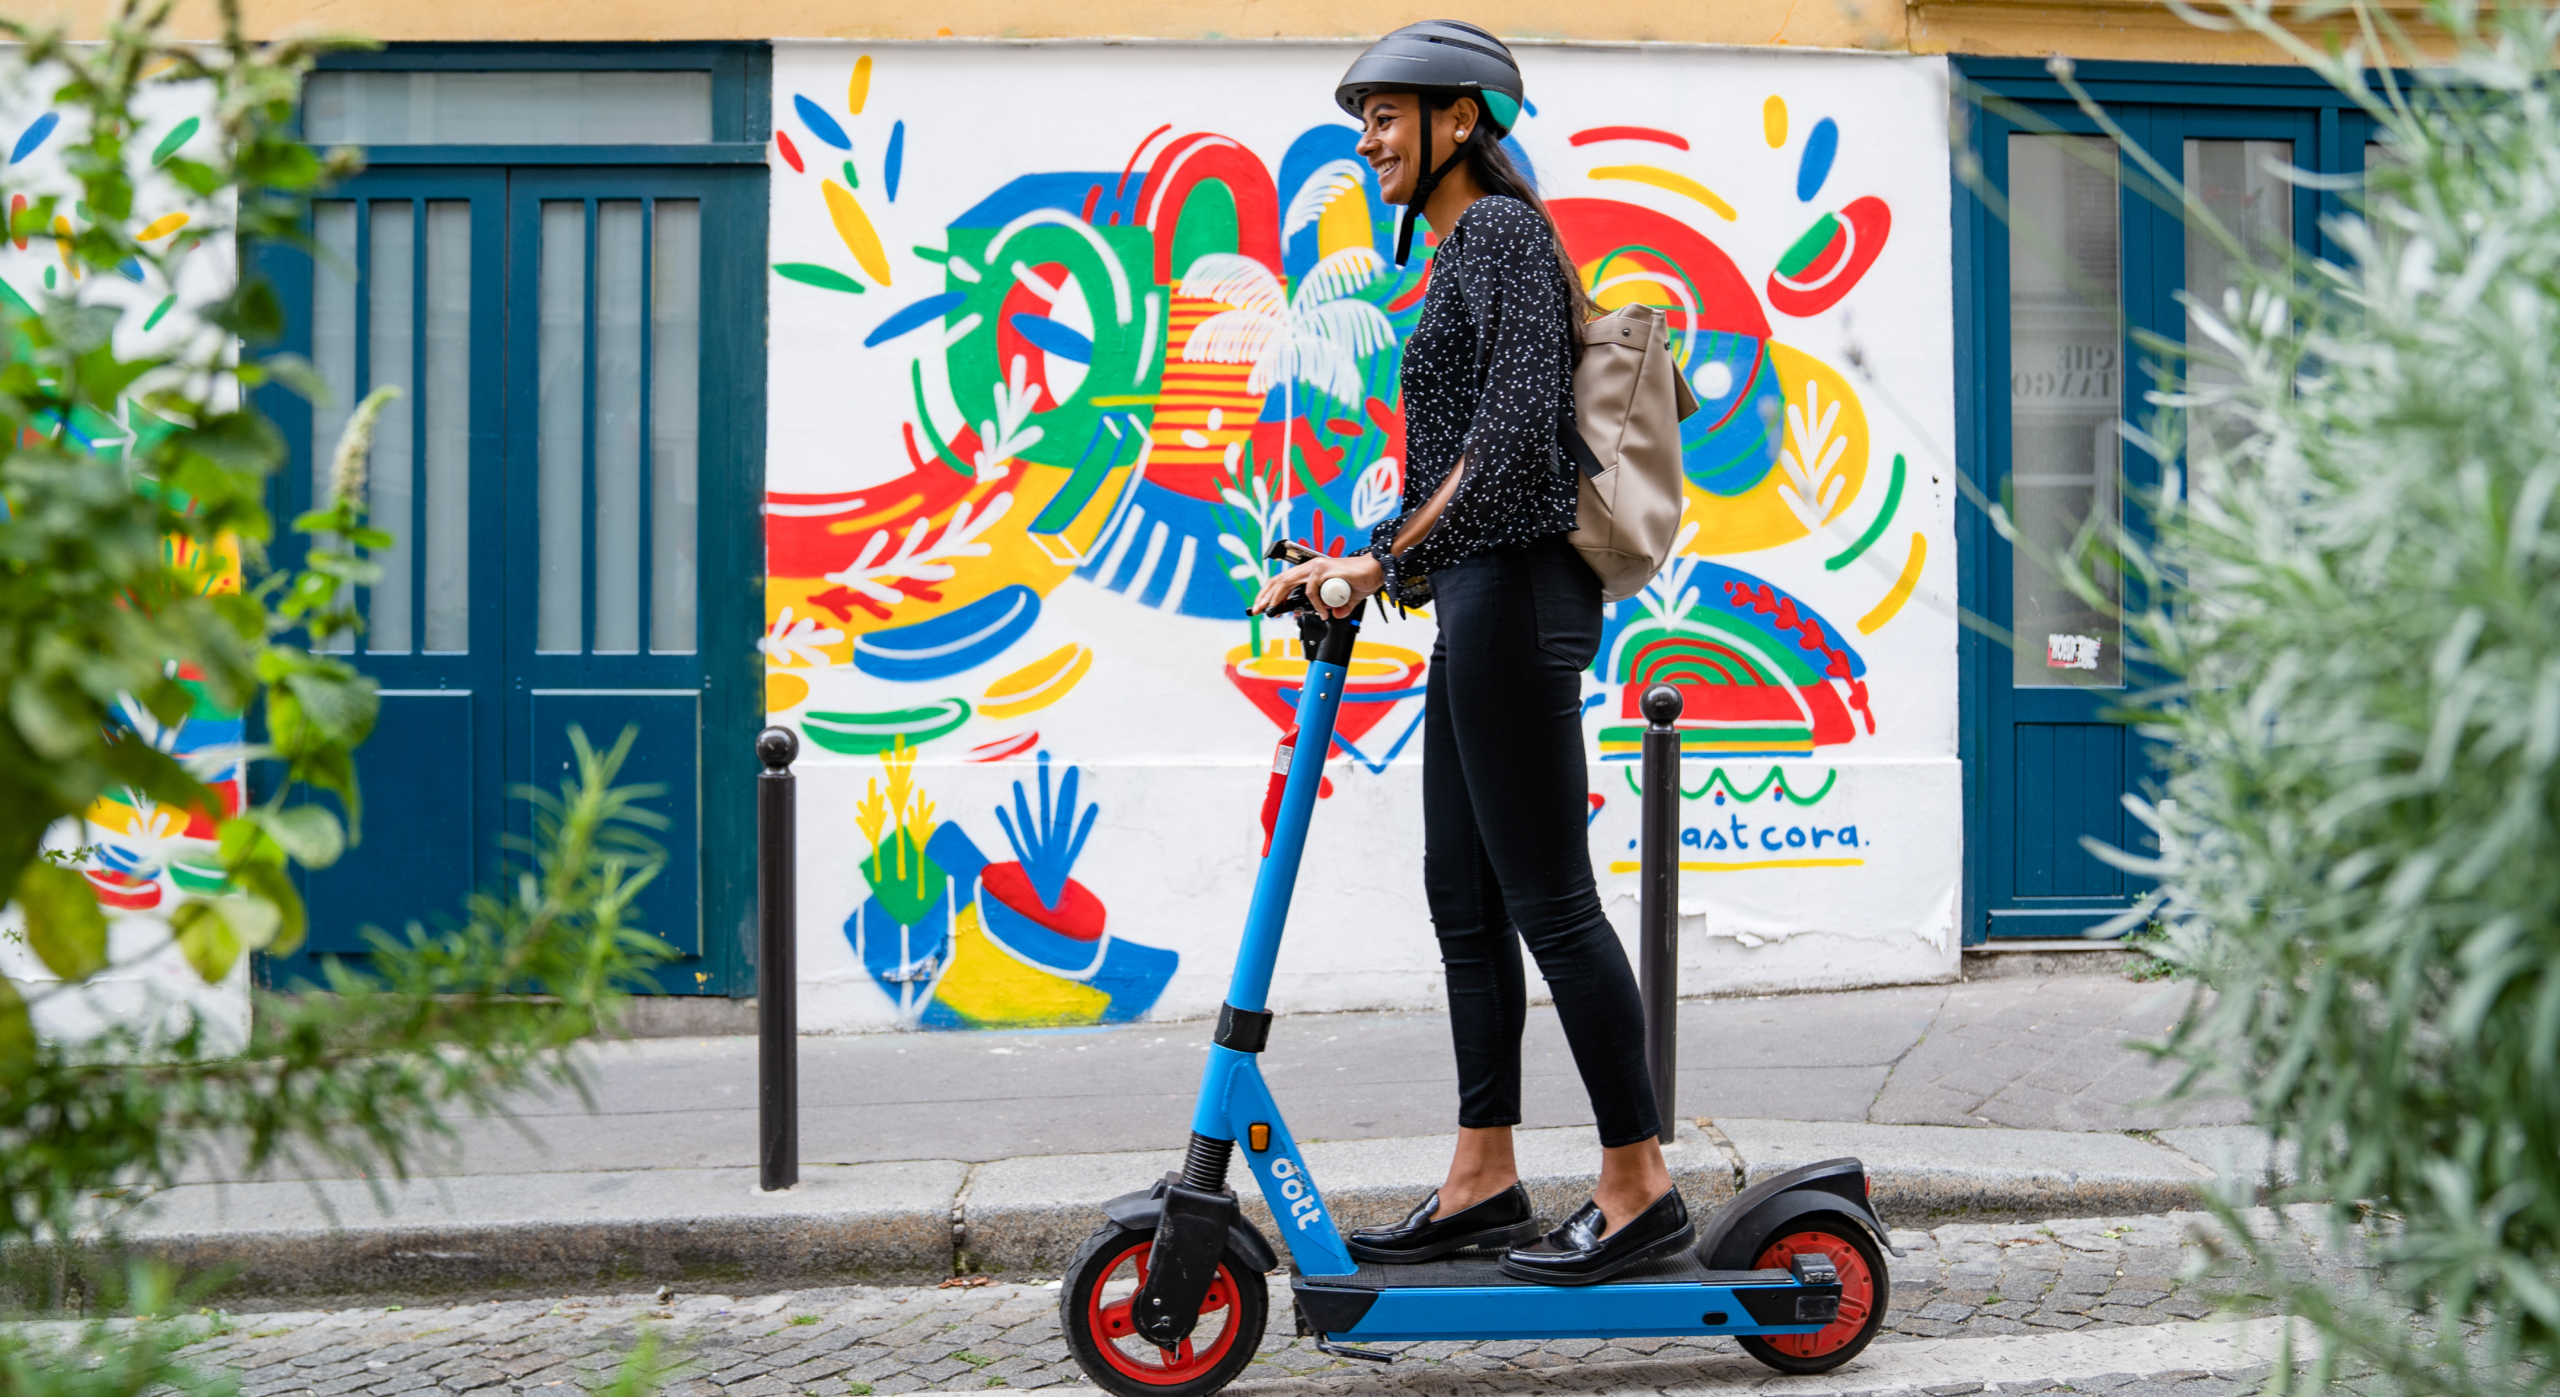 An image of a woman riding a blue Dott e-scooter in a city, with a colorful street mural in the background.